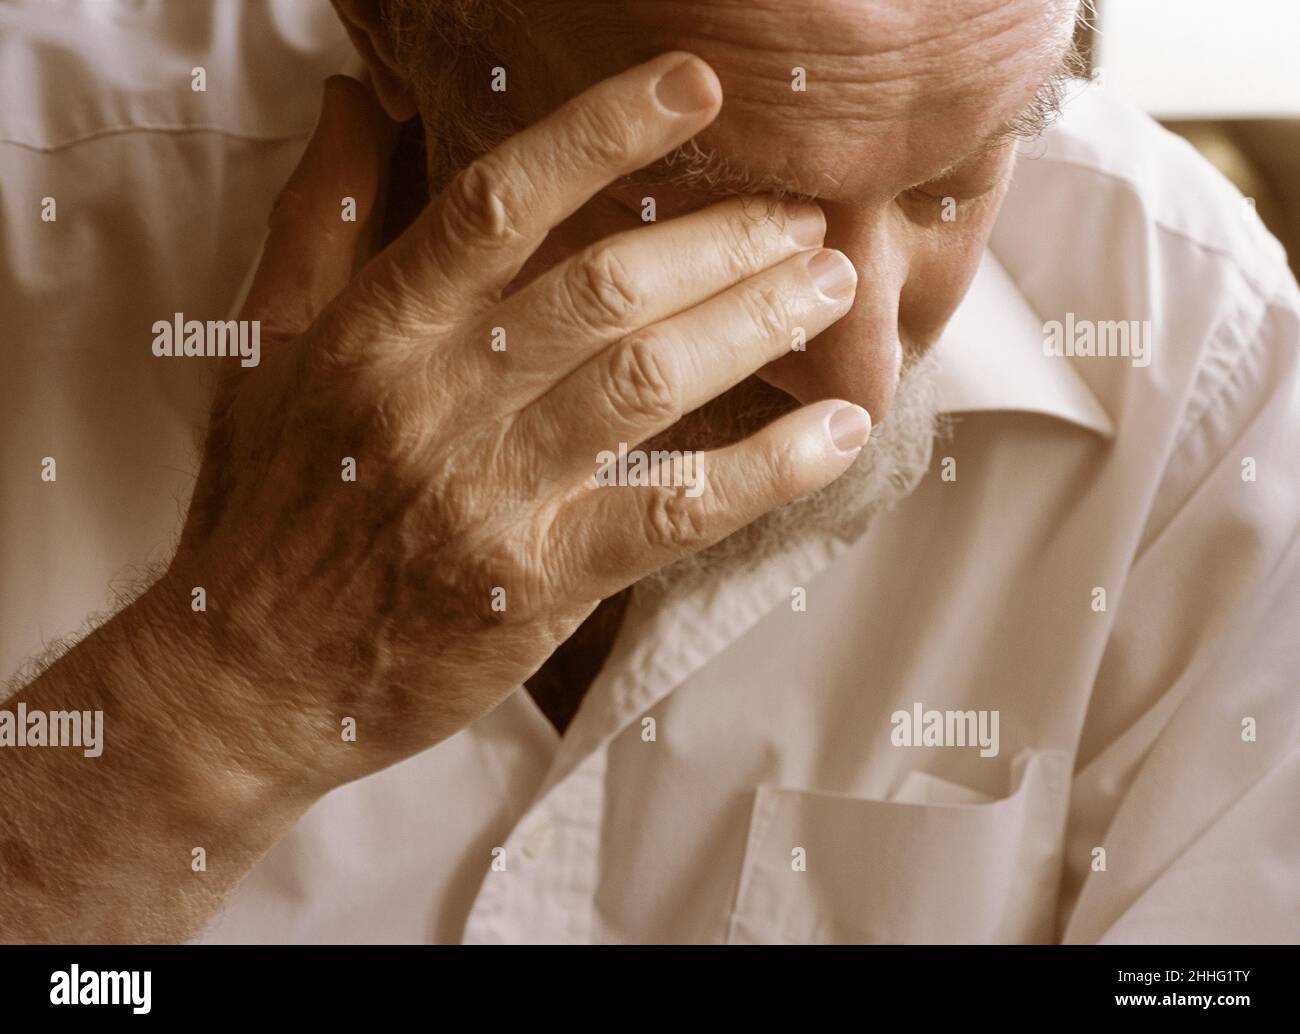 Aging, anxiety and emotion. Elderly man with his hand to his face. Portrait of a mature tired and serious male deep in thought. Stock Photo